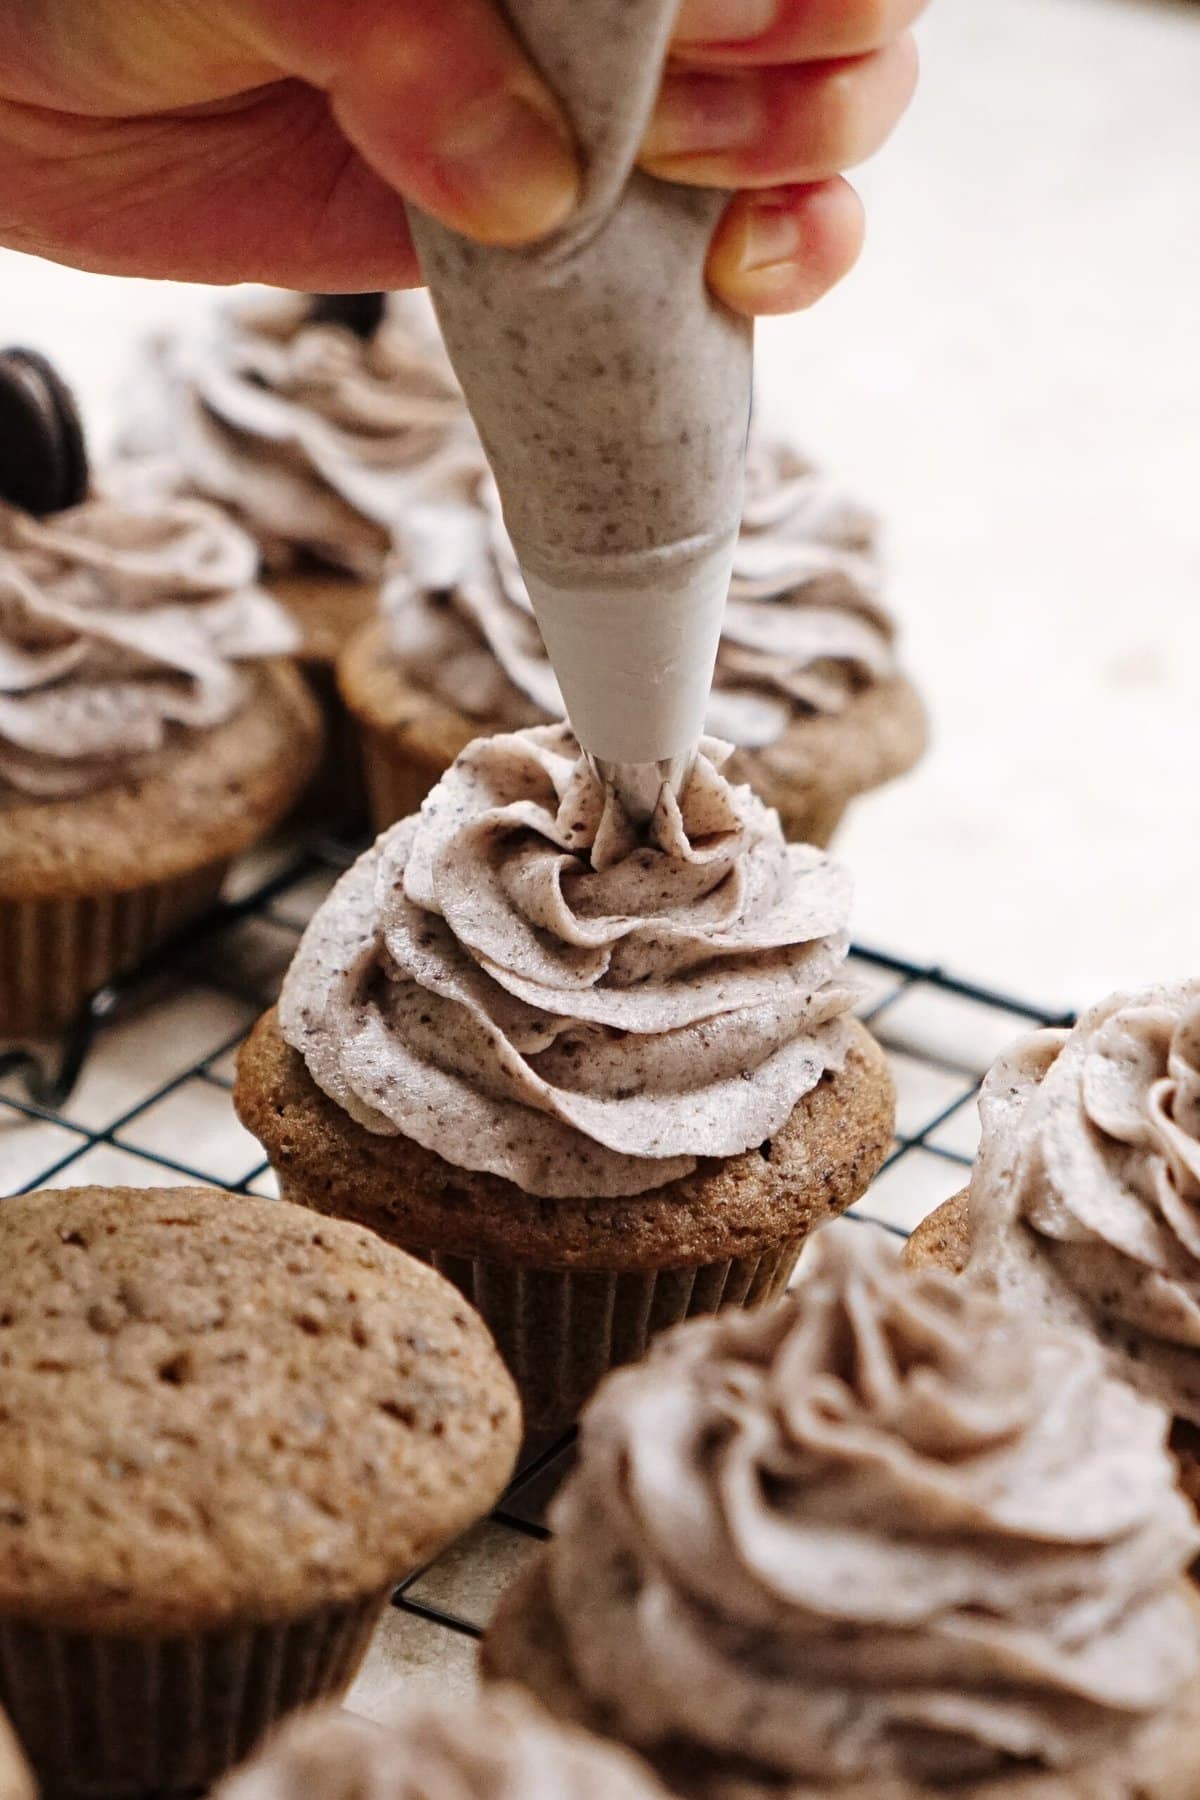 A hand piping chocolate swirled frosting onto cupcakes placed on a cooling rack.